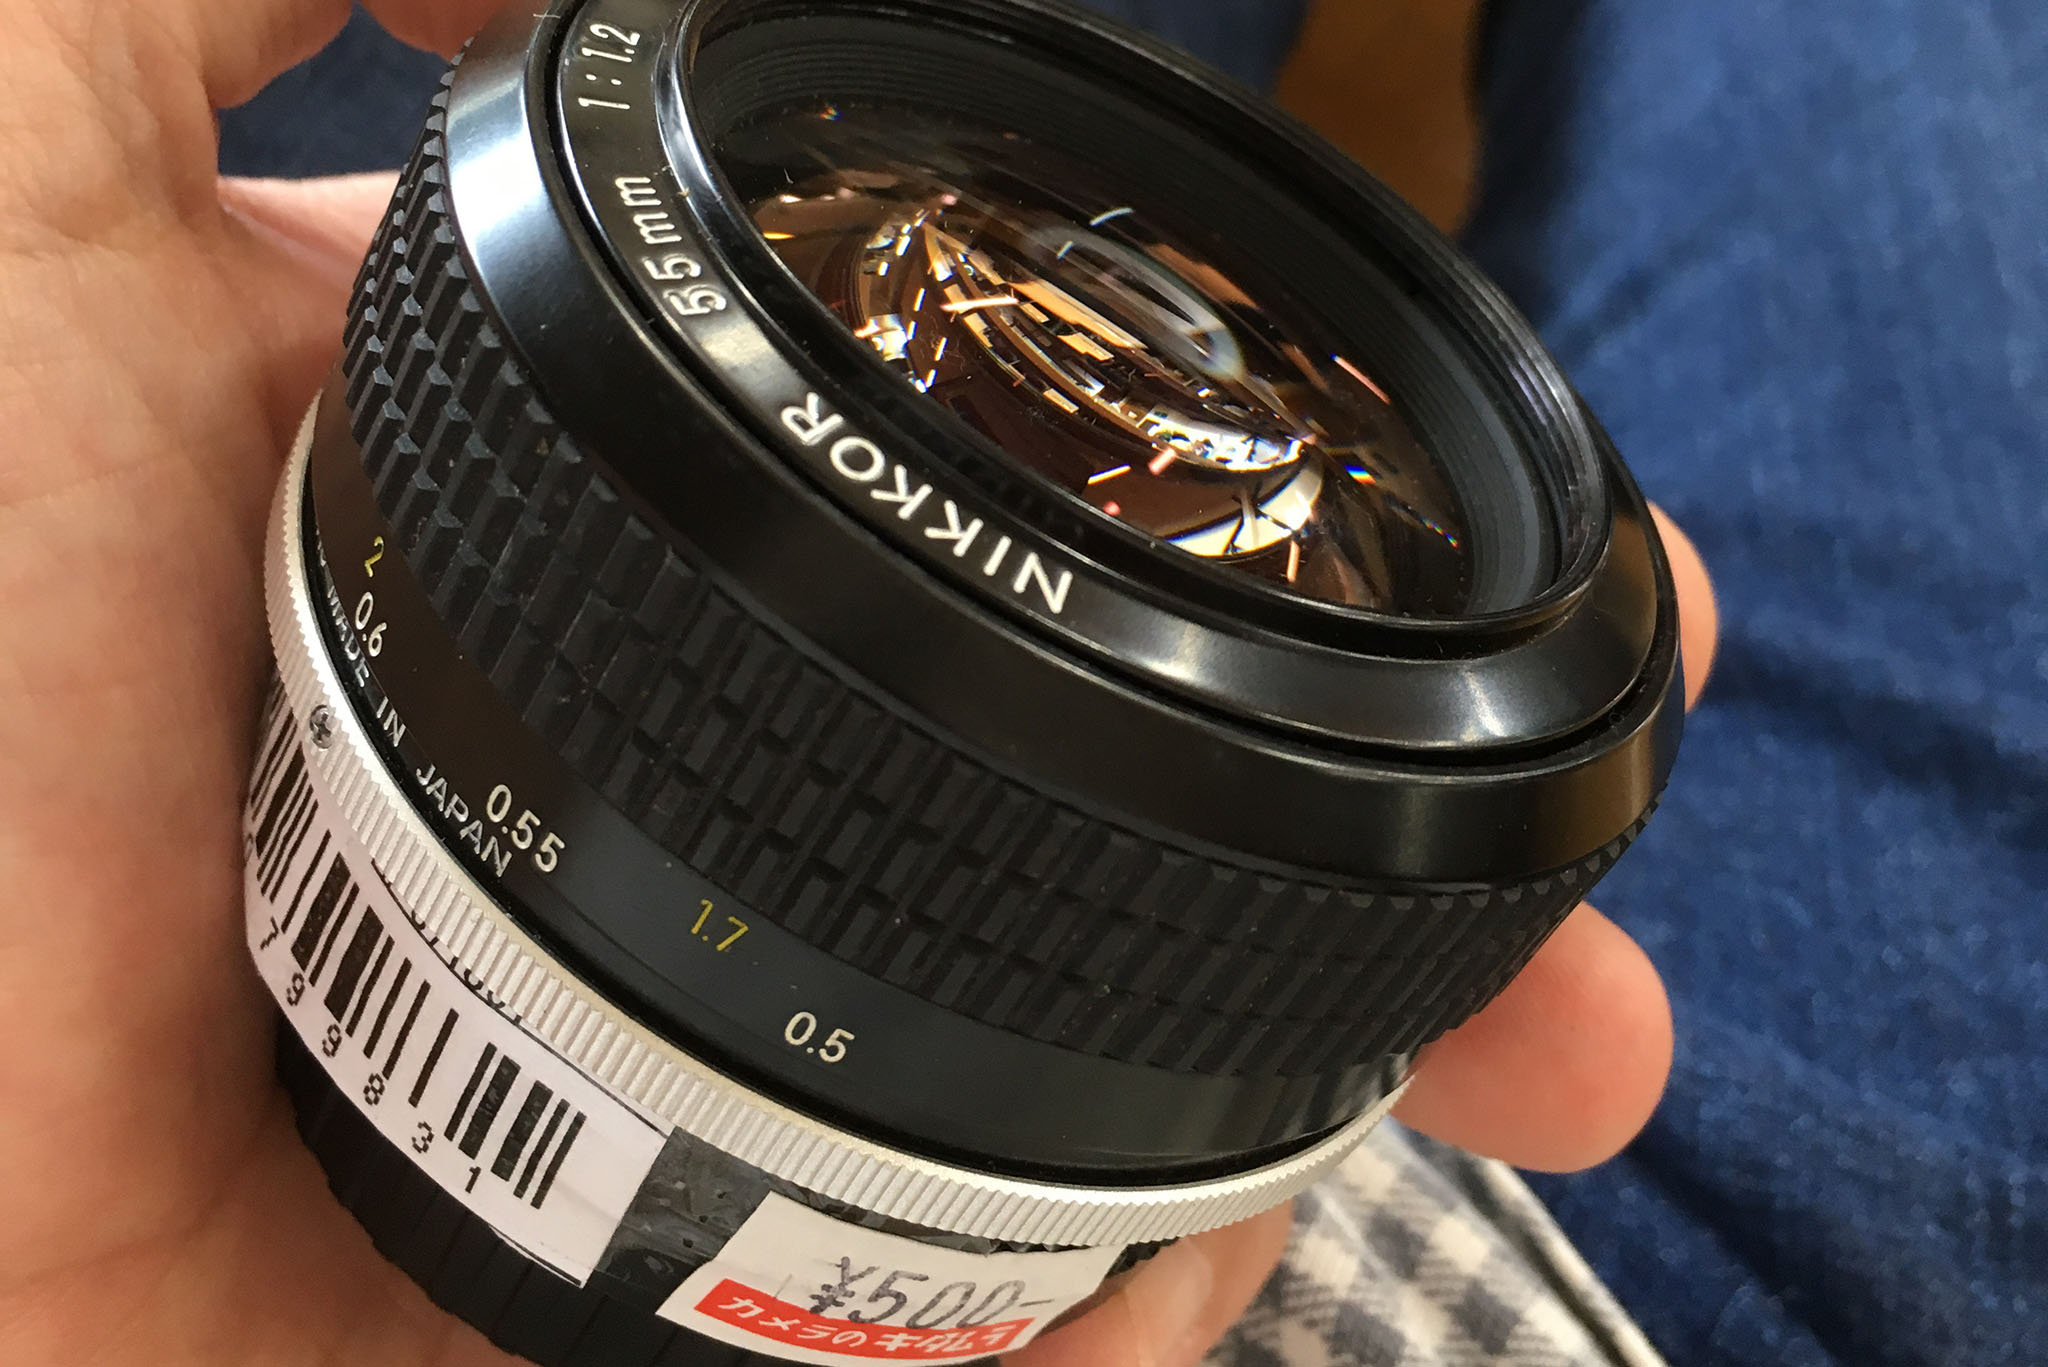 New Nikkor 55mm F1.2 | New Nikkor 55mm F1.2 | Photo Lens [ ふぉ